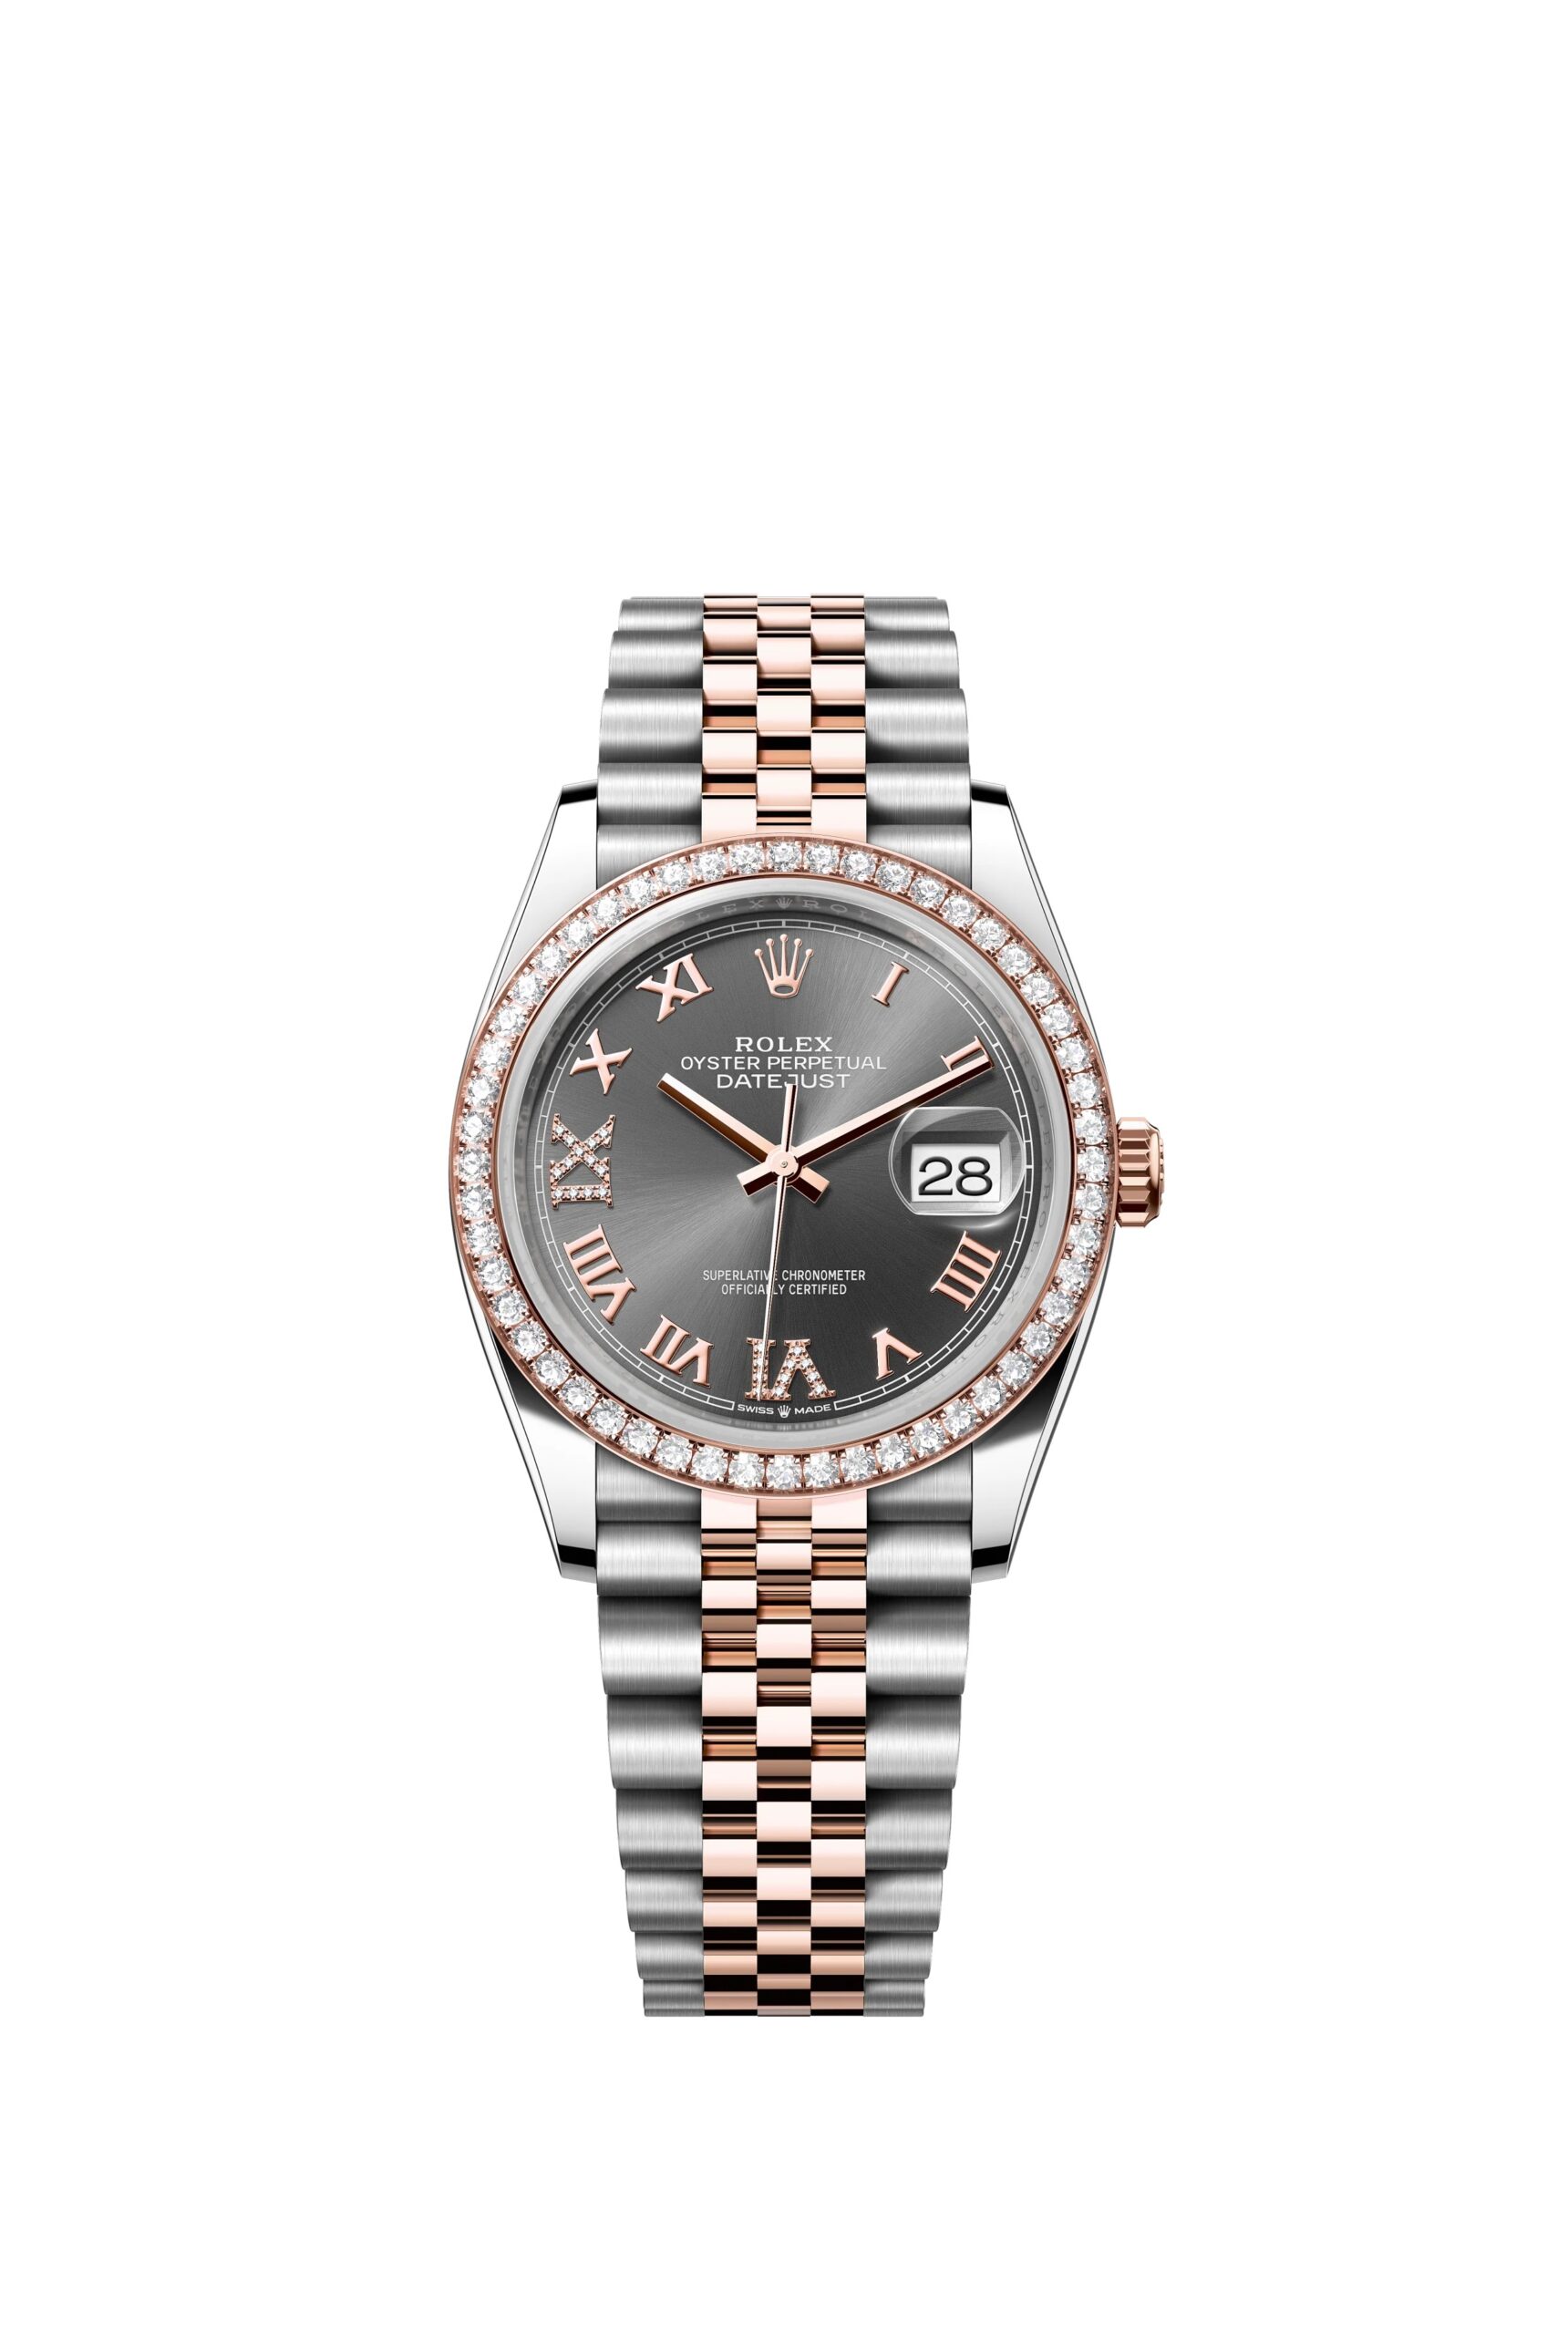 Rolex Datejust 36 Oyster, 36 mm, Oystersteel, Everose gold and diamonds Reference 126281RBR